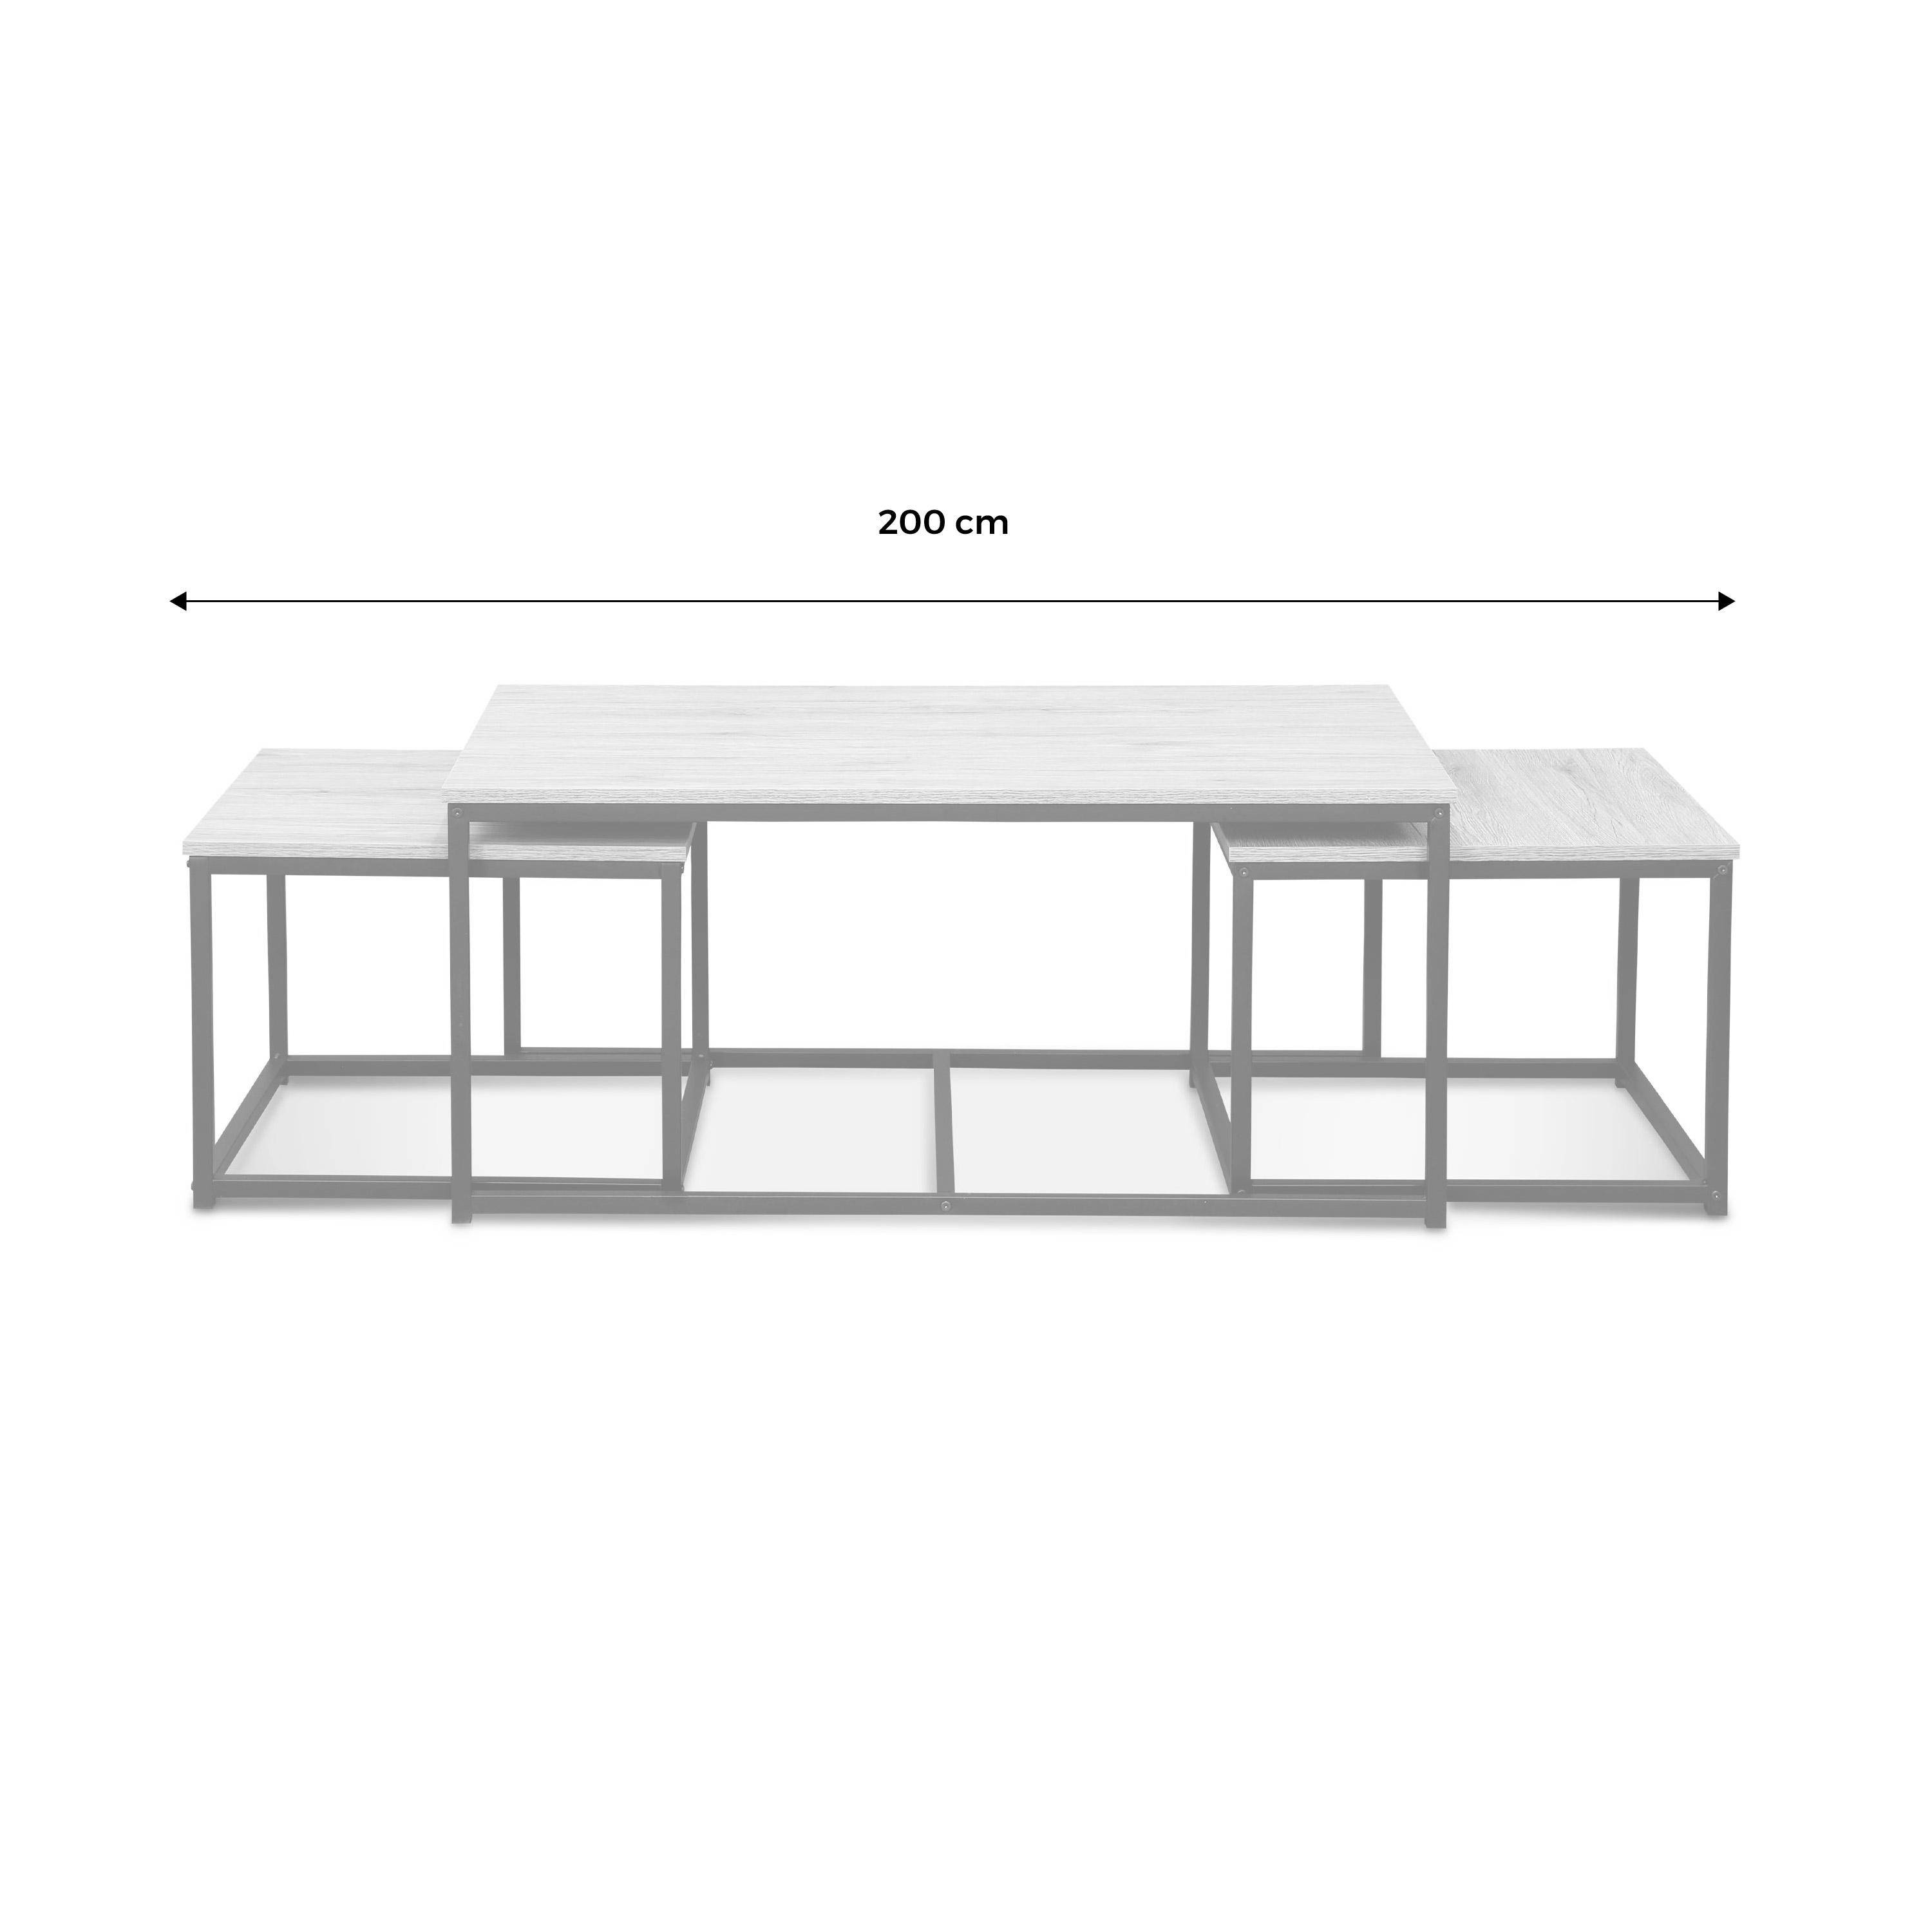 Set of 3 metal and wood-effect nesting tables, large table 100x60x45cm, 2x small tables 50x50x38cm - Loft - Black,sweeek,Photo9